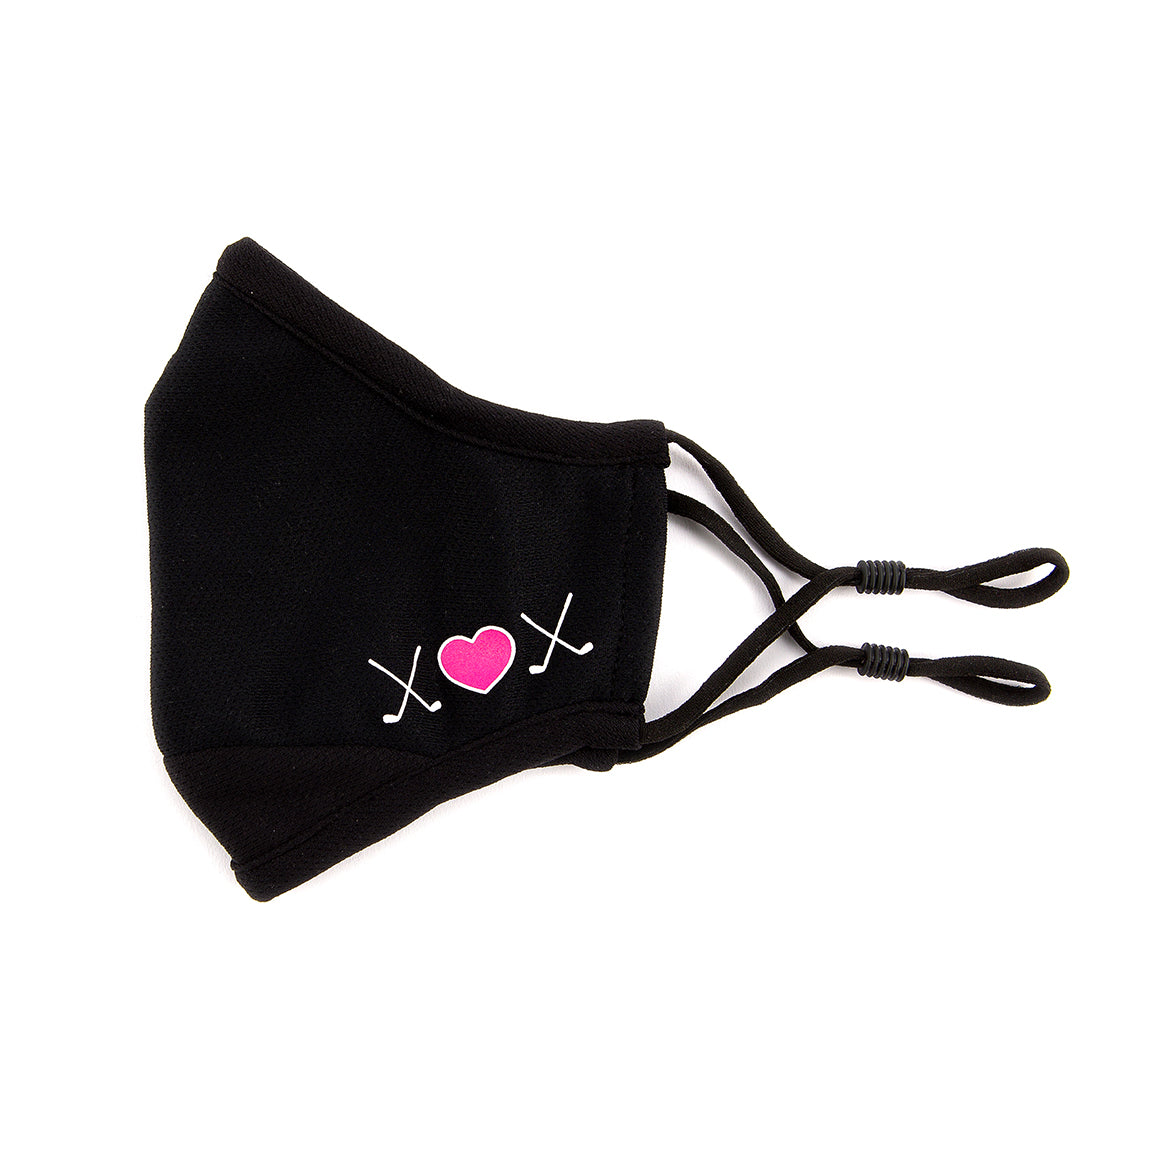 black face mask with white and pink crossed golf clubs and heart printed on one side